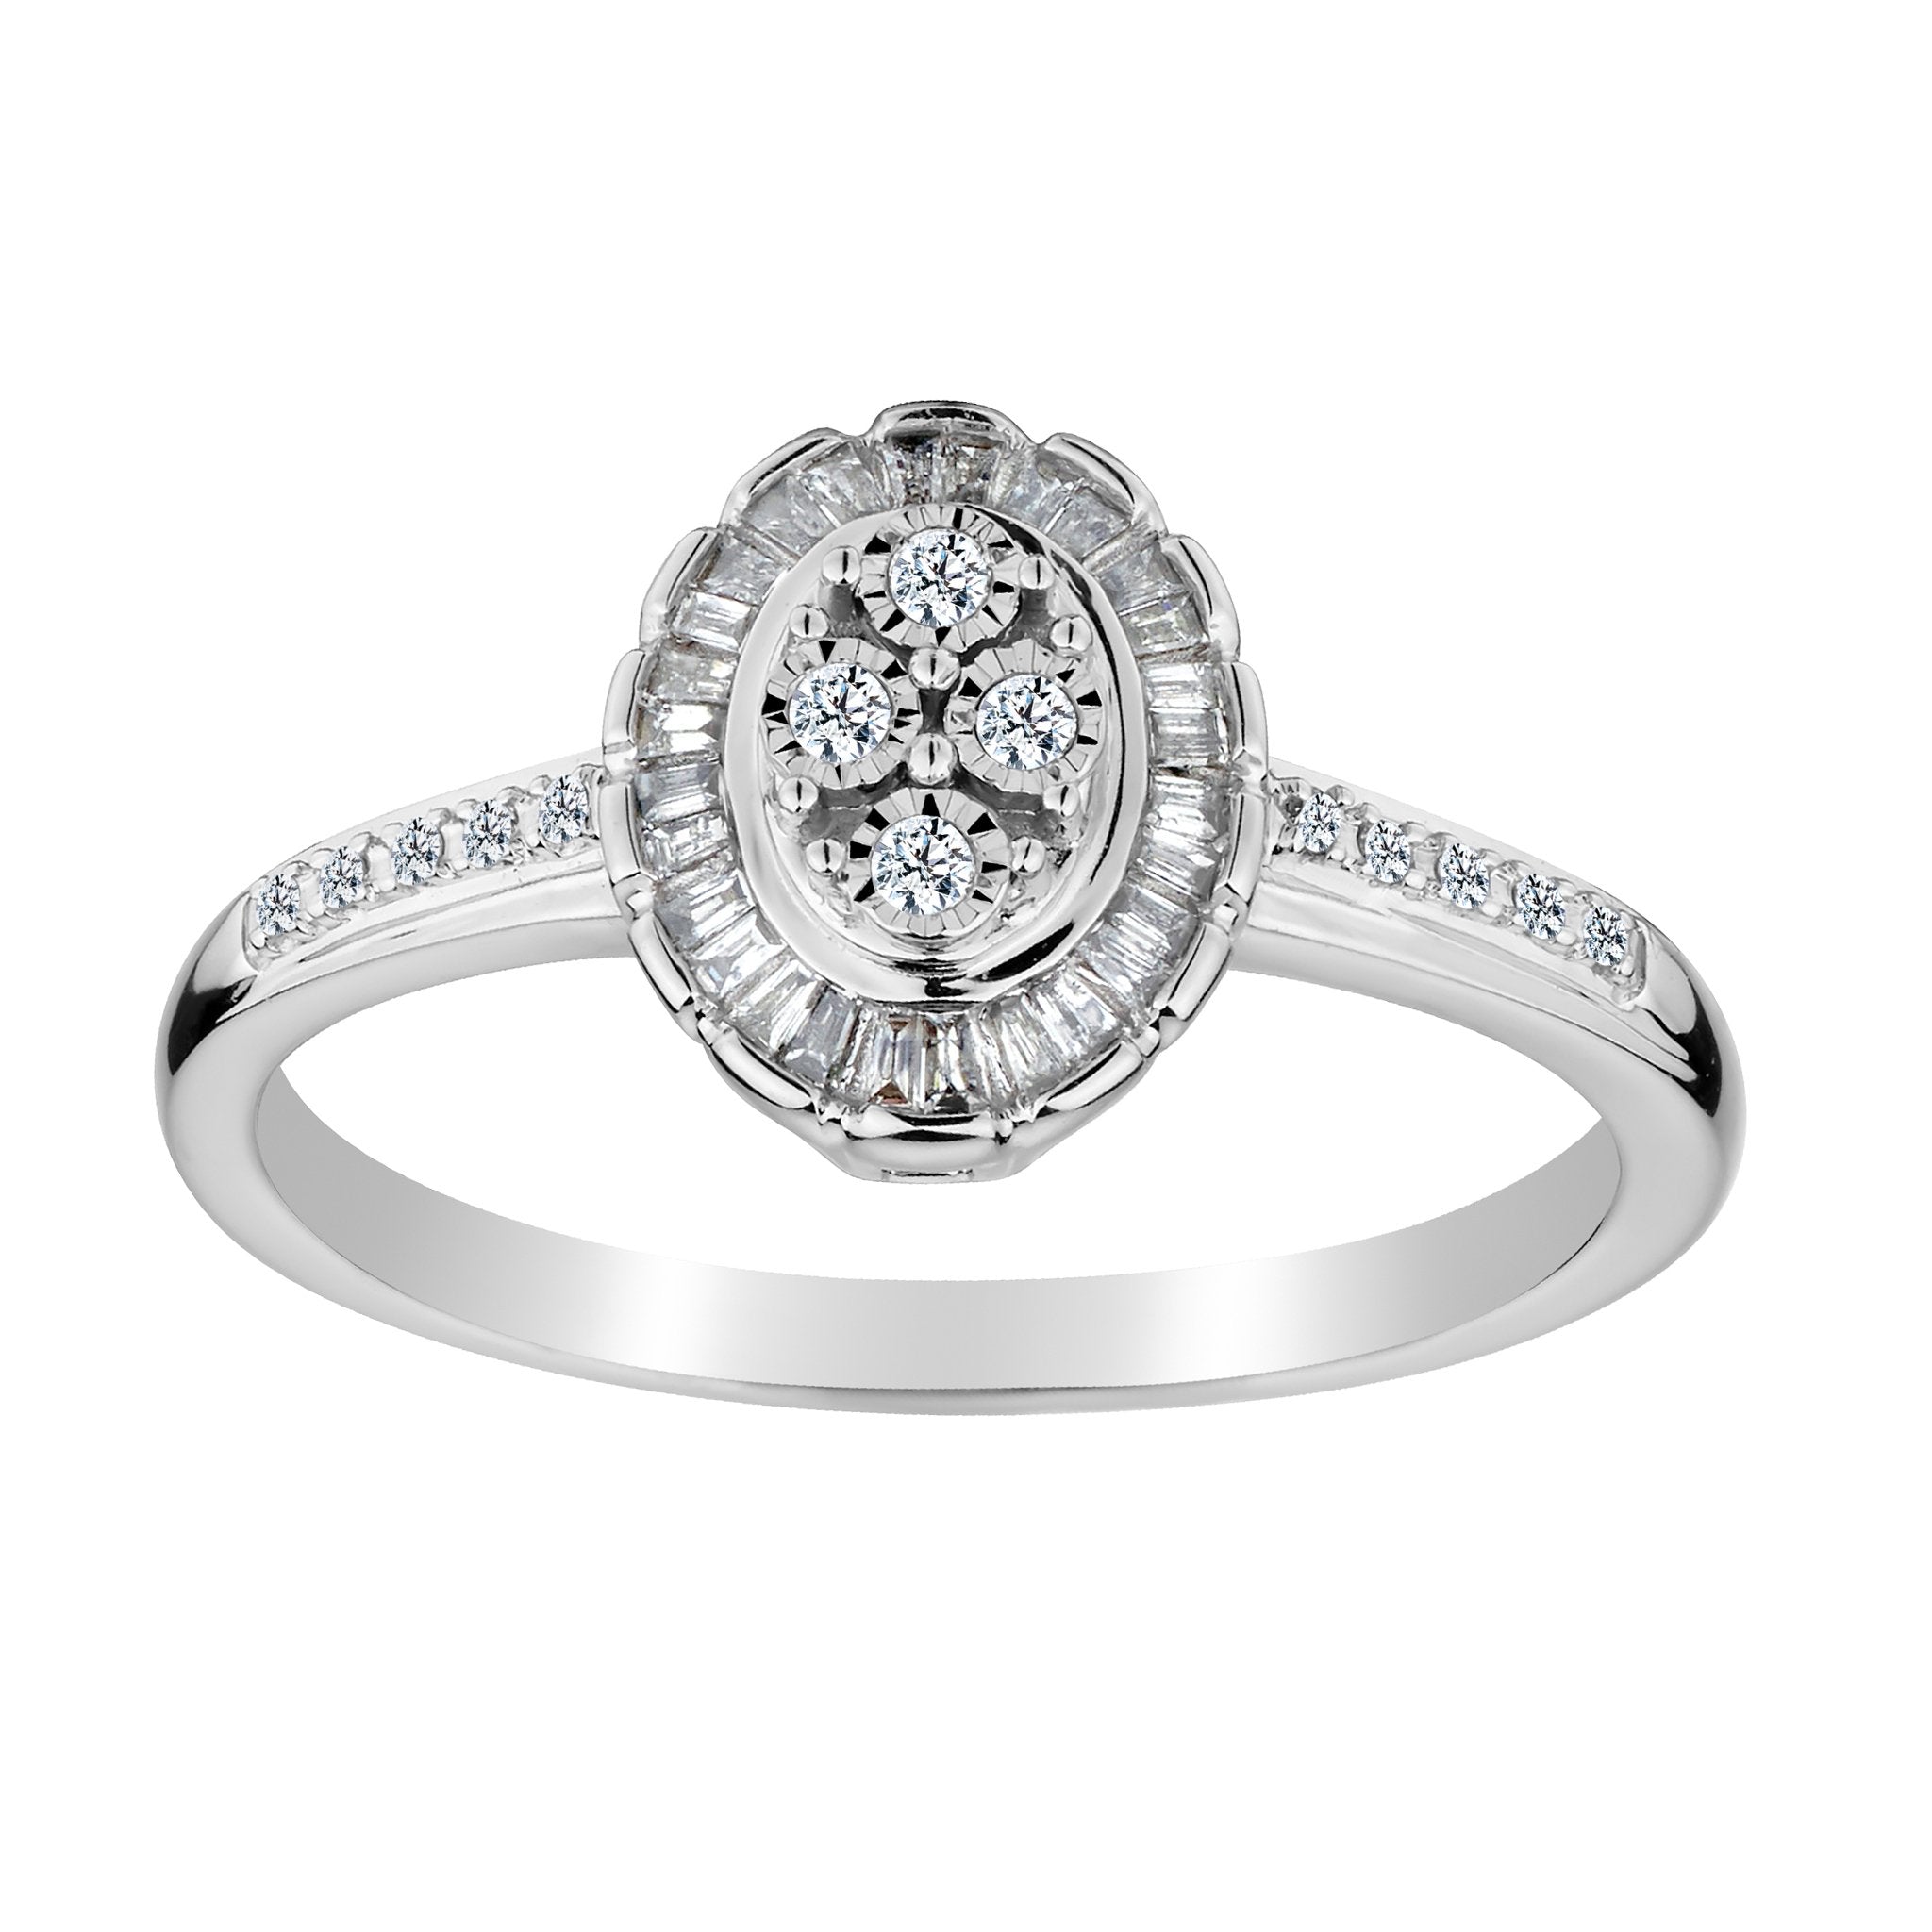 .16 Carat Diamond "Elegance" Ring,  10kt White Gold. Fashion Rings. Griffin Jewellery Designs